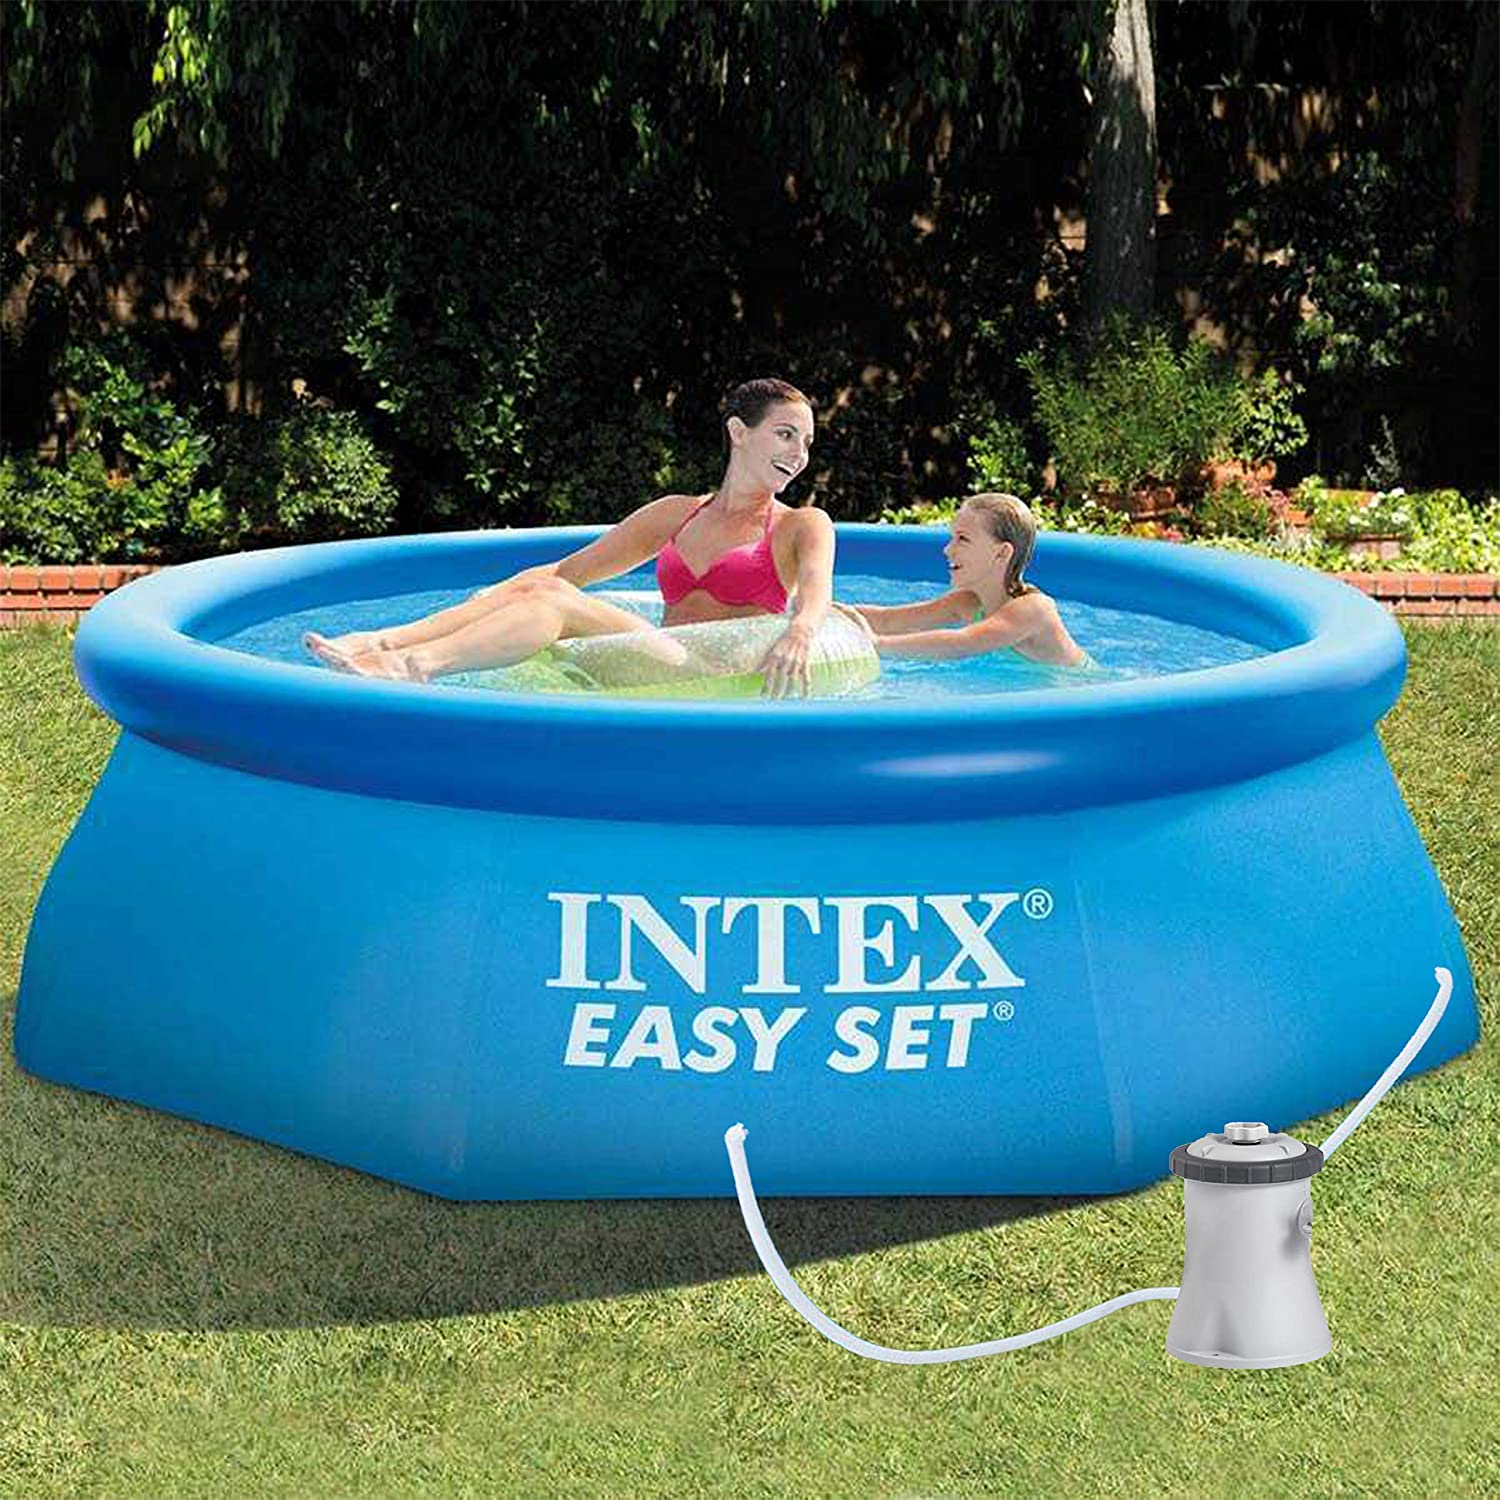 INTEX Easy Set Pool 8'' x 30" With Filter Pump Type "H"